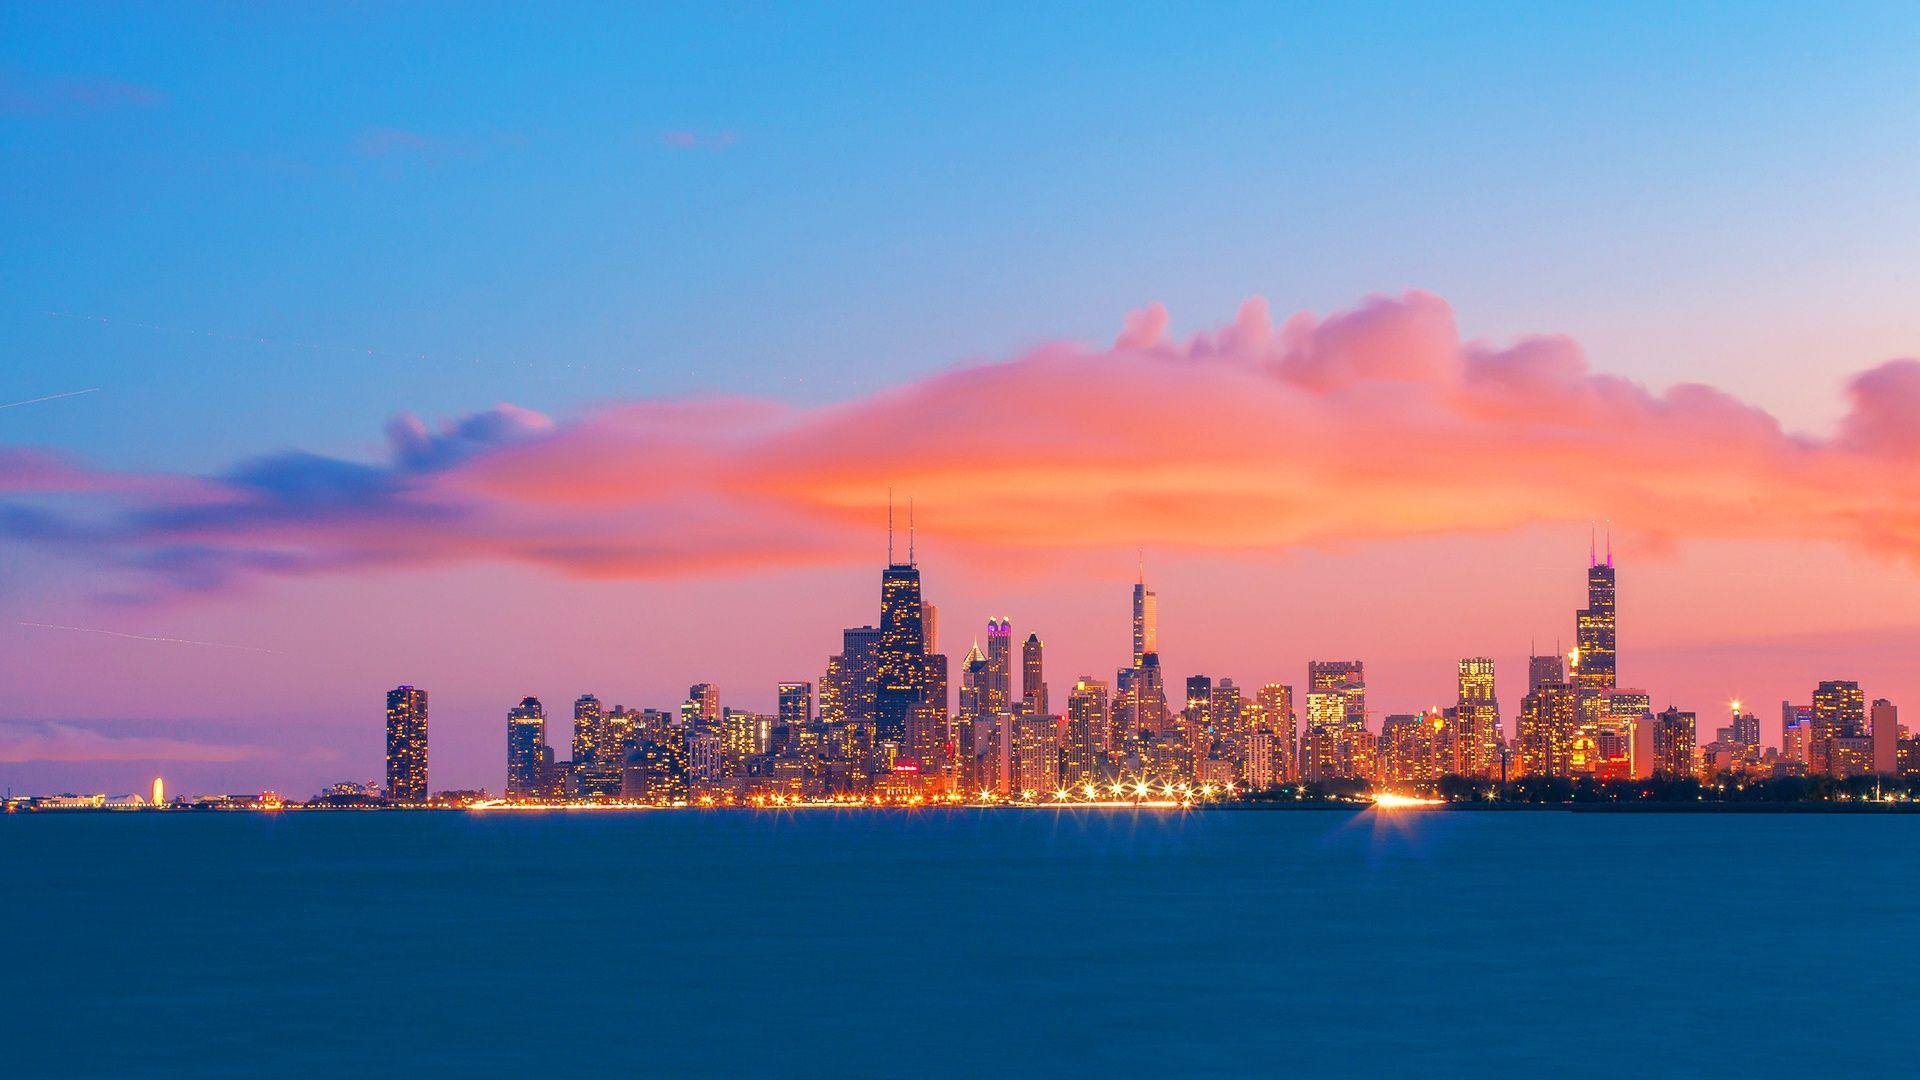 Wallpaper.wiki Chicago Skyline Background HD PIC WPE009998